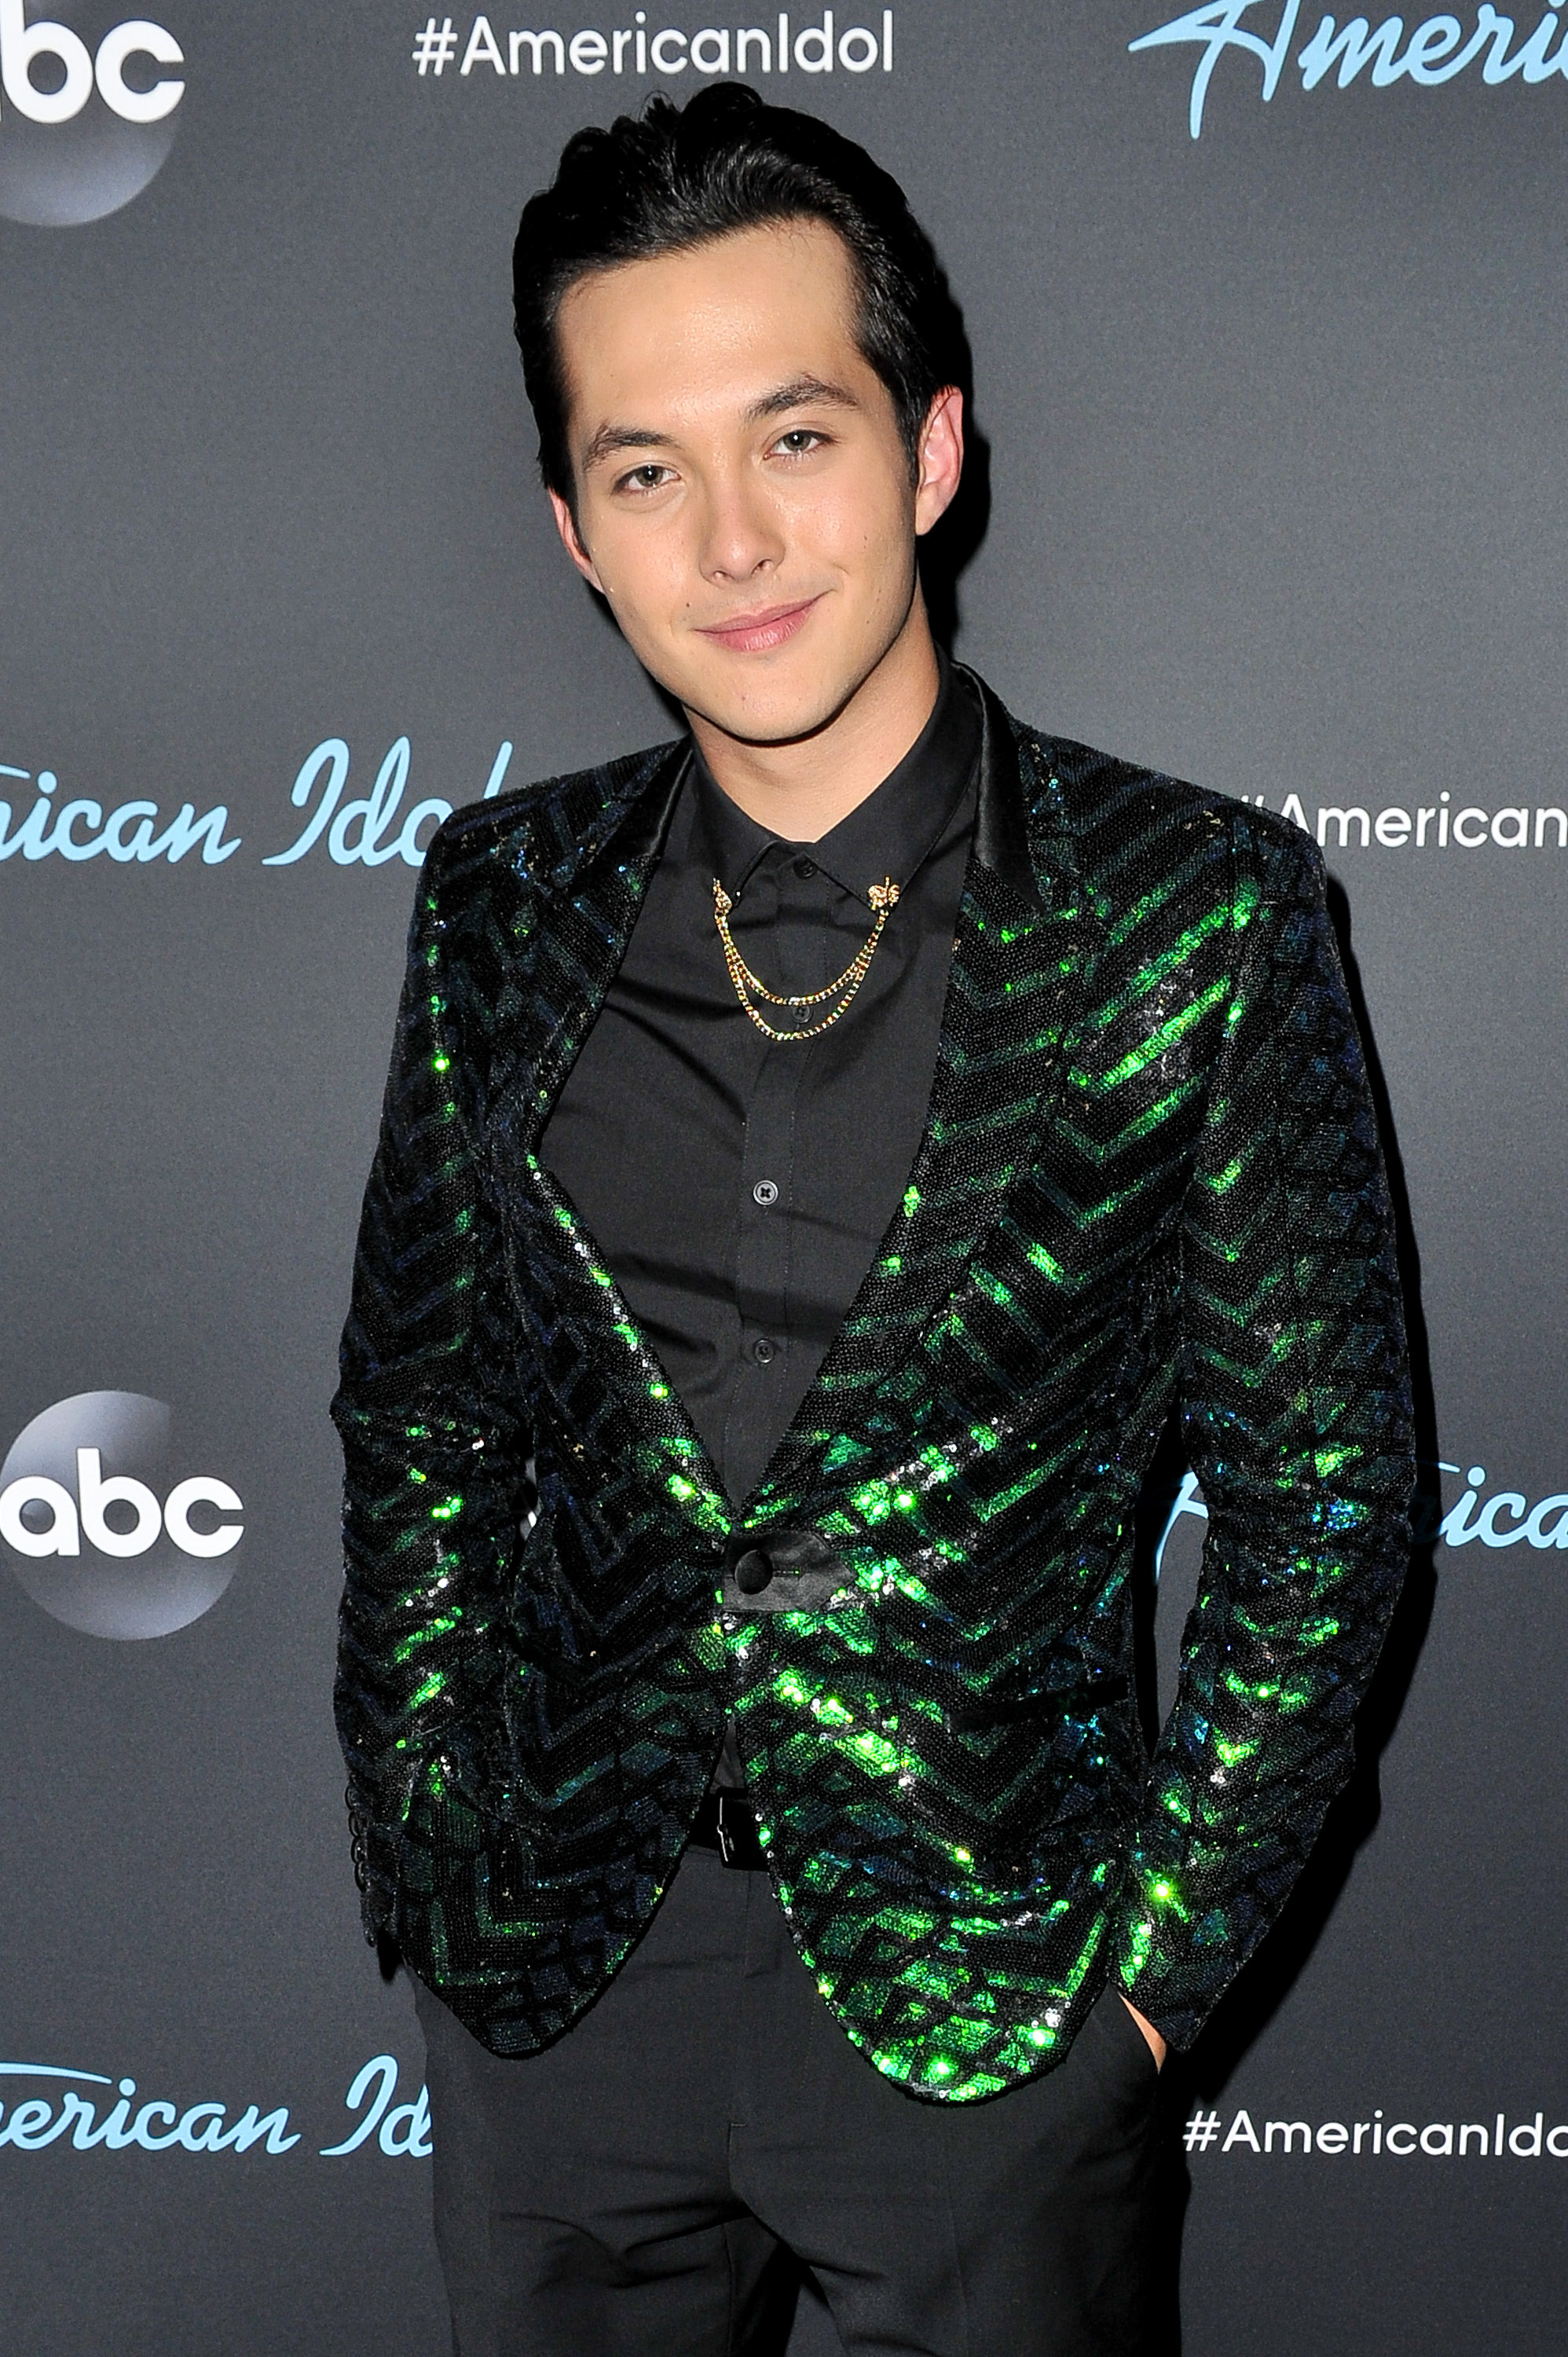 Laine Hardy poses for a photo after ABC's "American Idol" live show on April 28, 2019, in Los Angeles, California. | Source: Getty Images